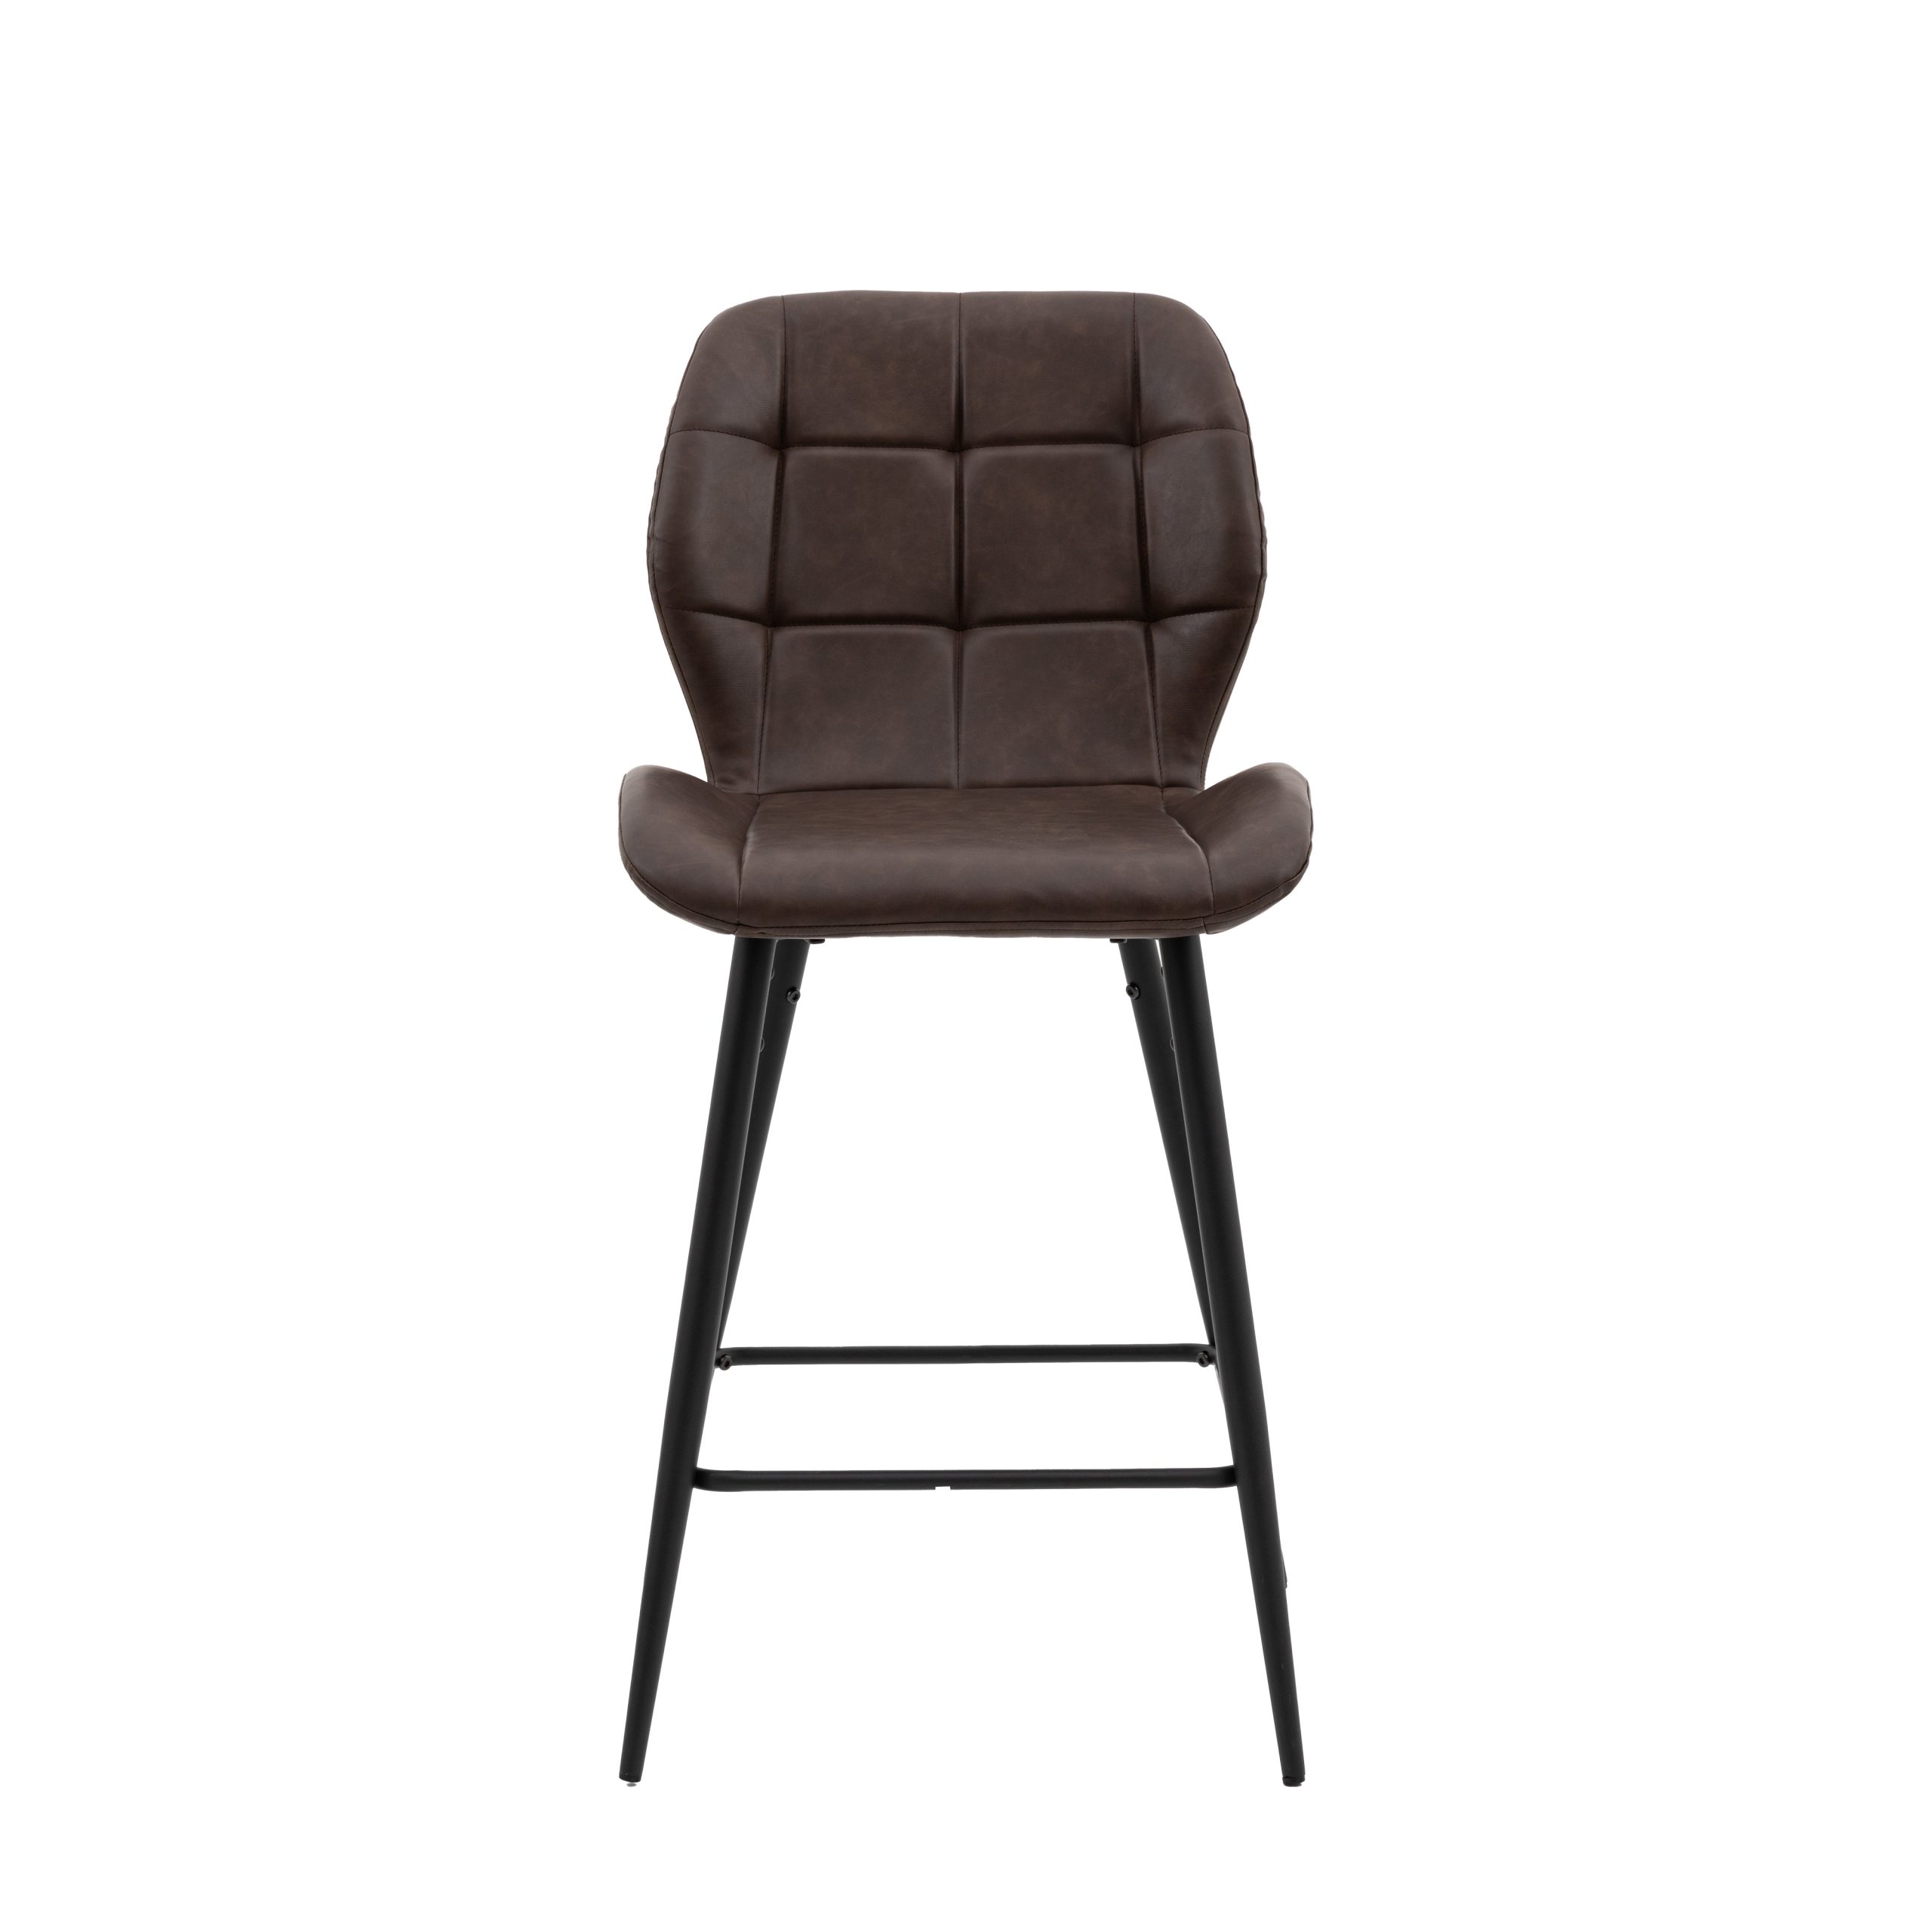 Gallery Direct Manford Stool Brown (Set of 2)